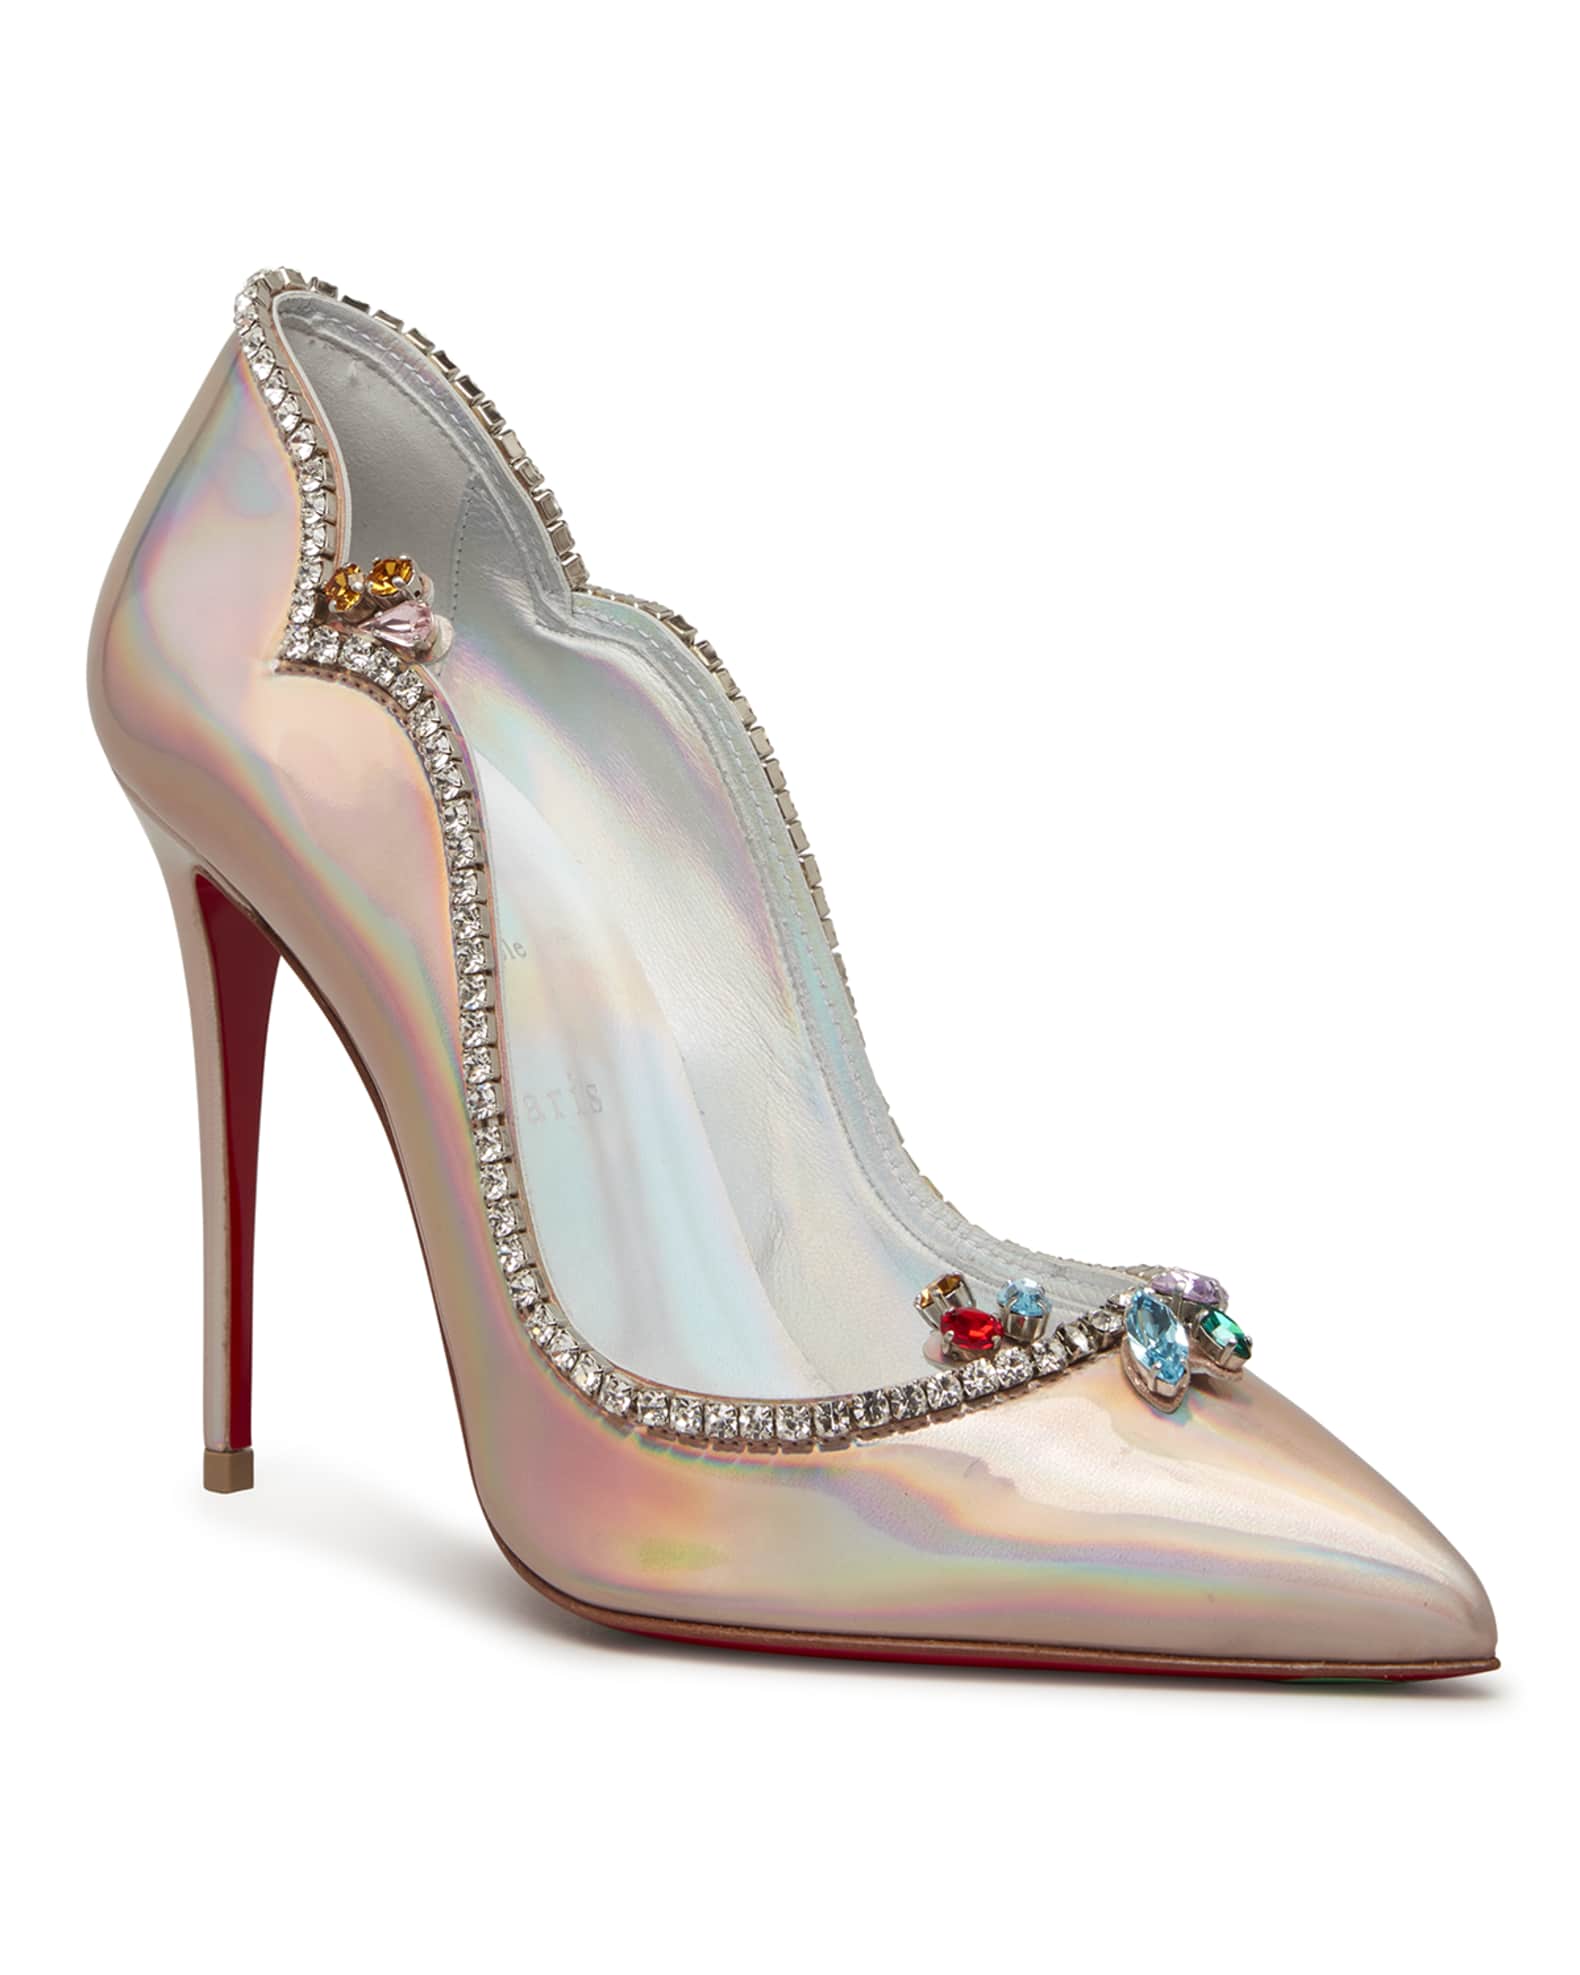 Christian Louboutin Chick Queen Iridescent Jewel Red Sole Pumps ...